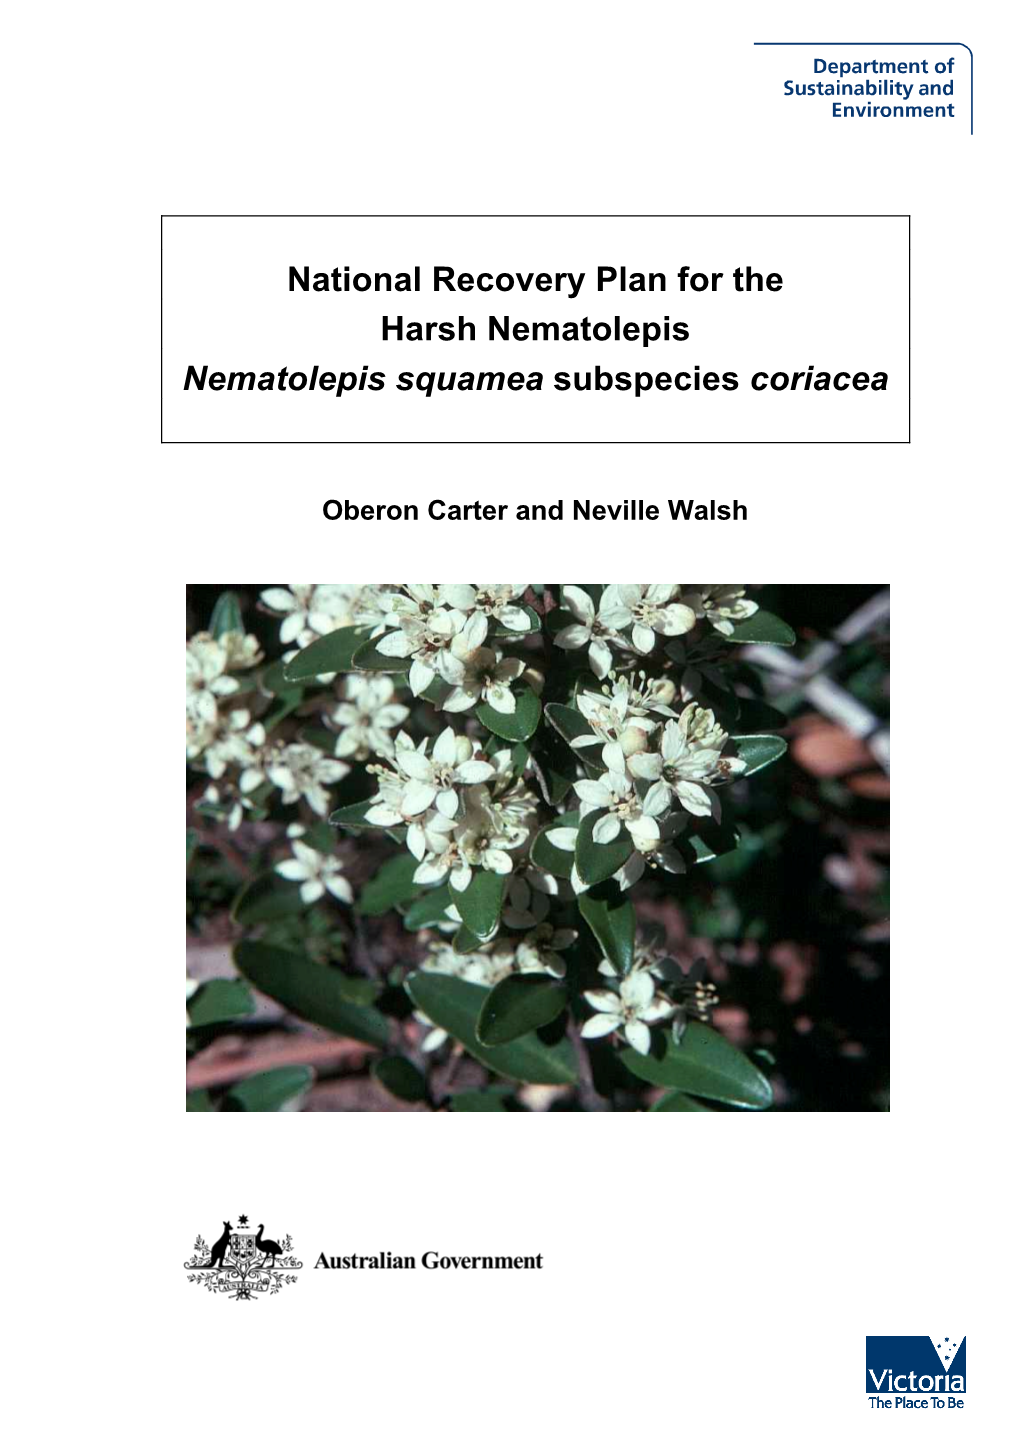 National Recovery Plan for the Harsh Nematolepis Nematolepis Squamea Subspecies Coriacea